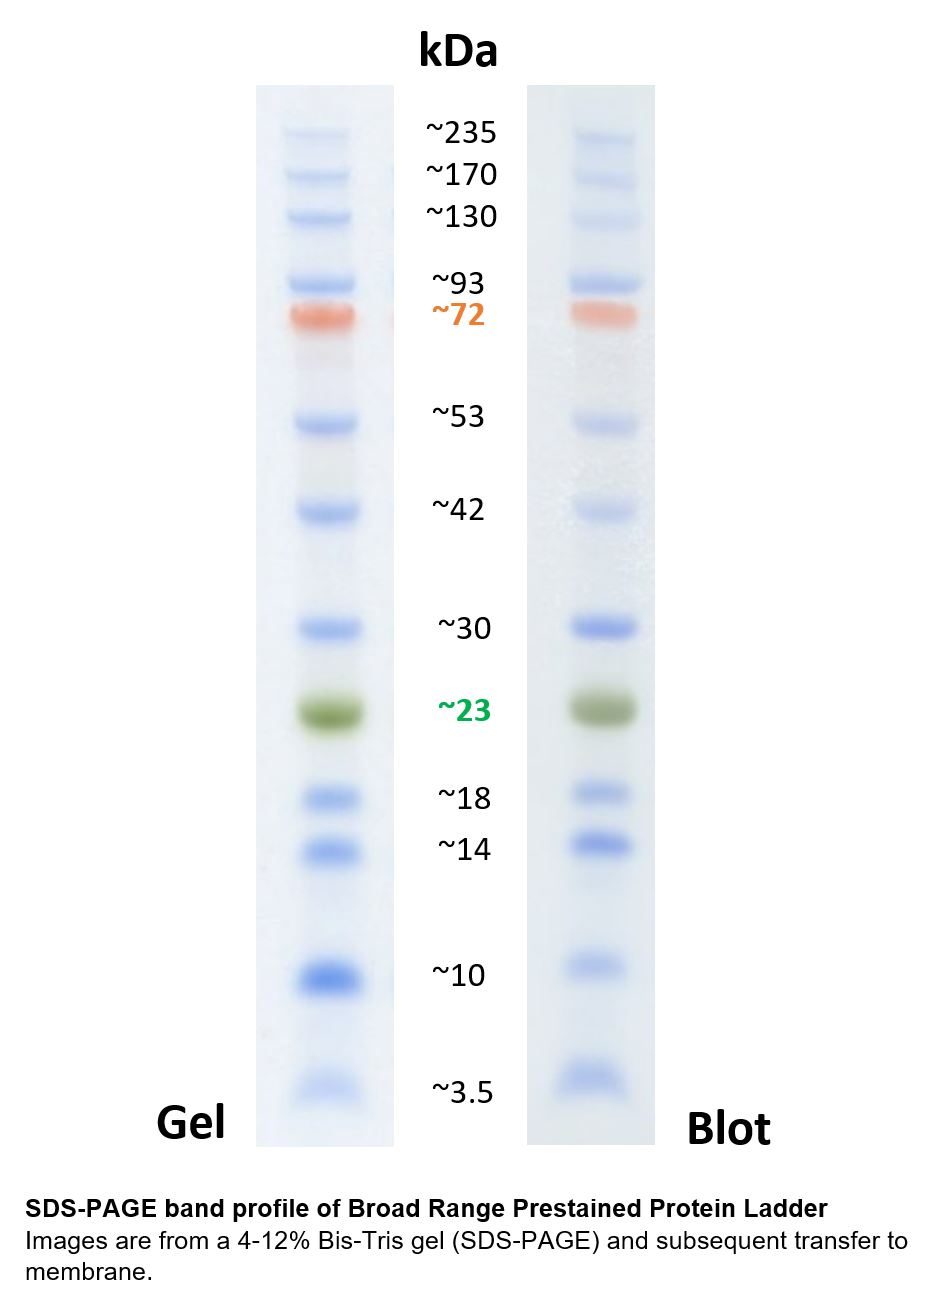 Resolution of the broad range prestained protein ladder in a 4-12% Bis-Tris gel (SDS-PAGE). The image shows the migration pattern in the gel and after transfer to a PVDF membrane.